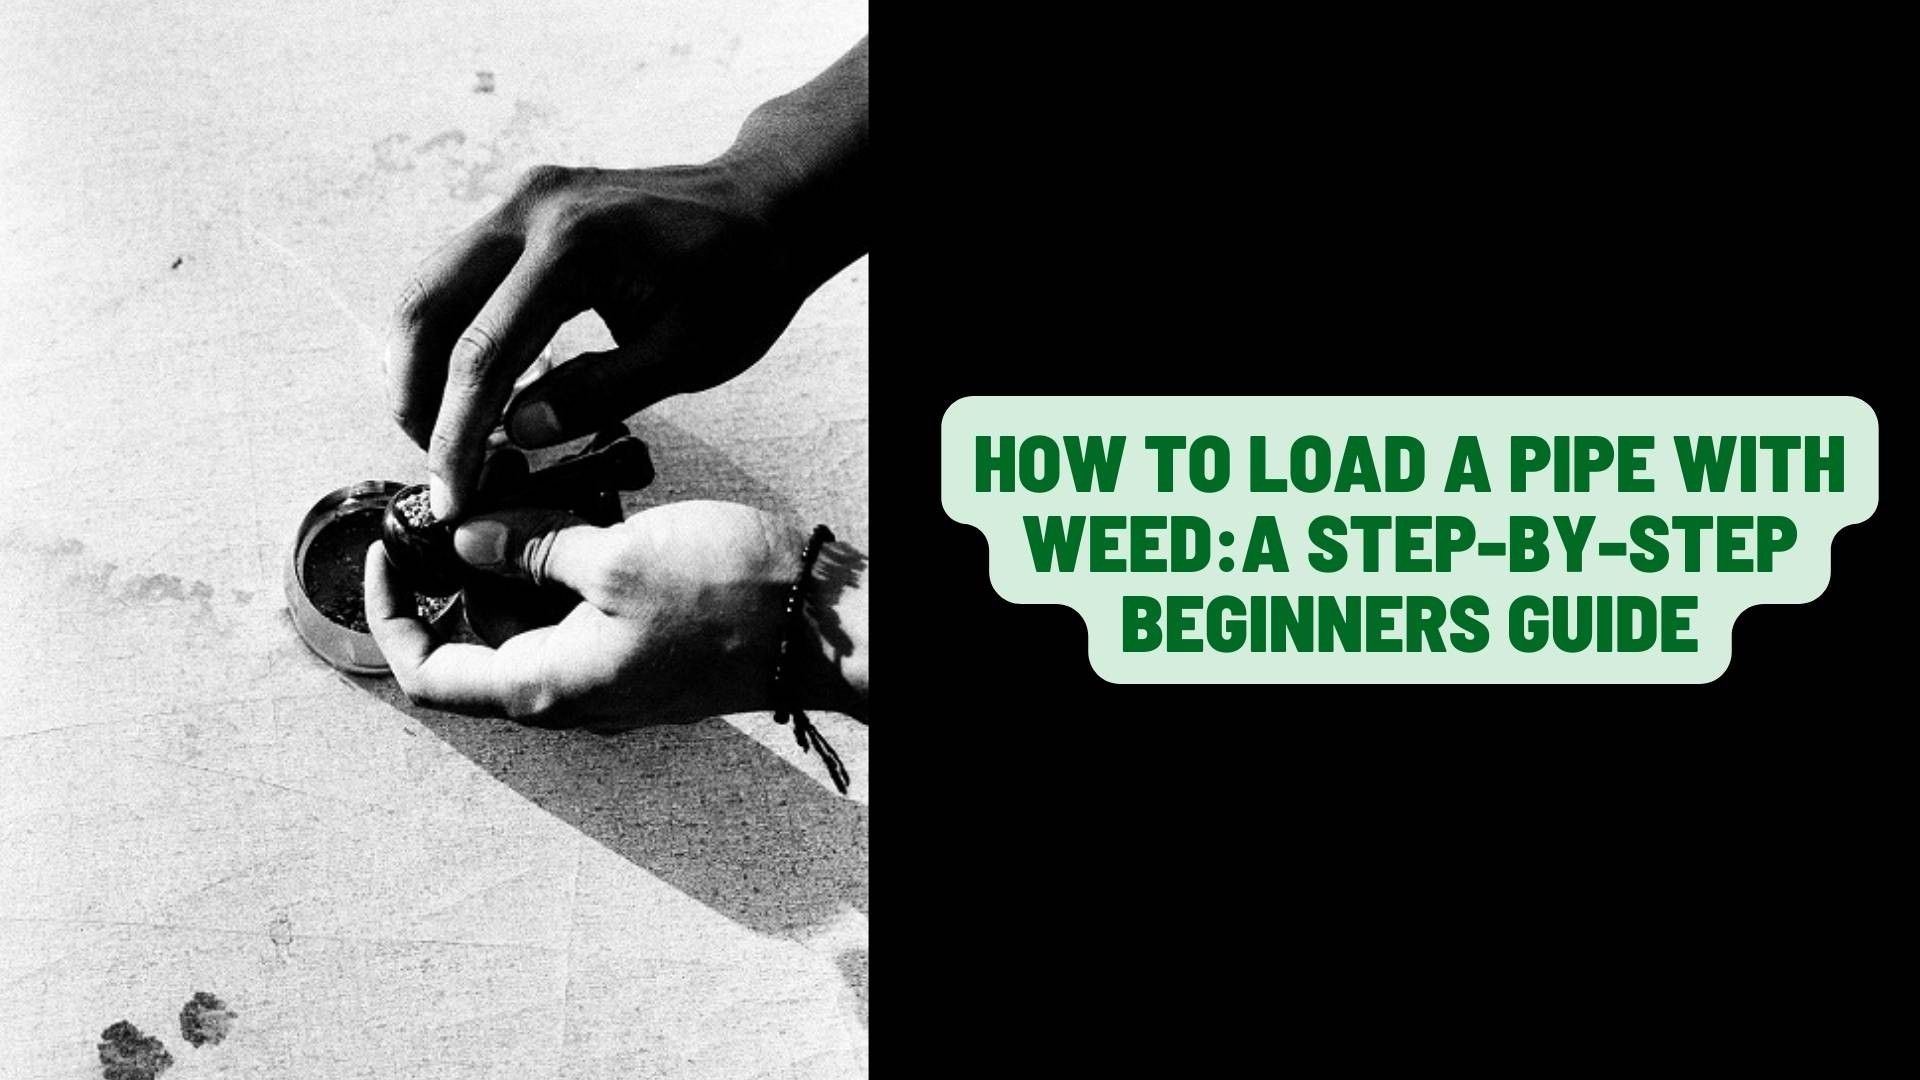 How To Load a Pipe With Weed: A Step-By-Step Beginners Guide